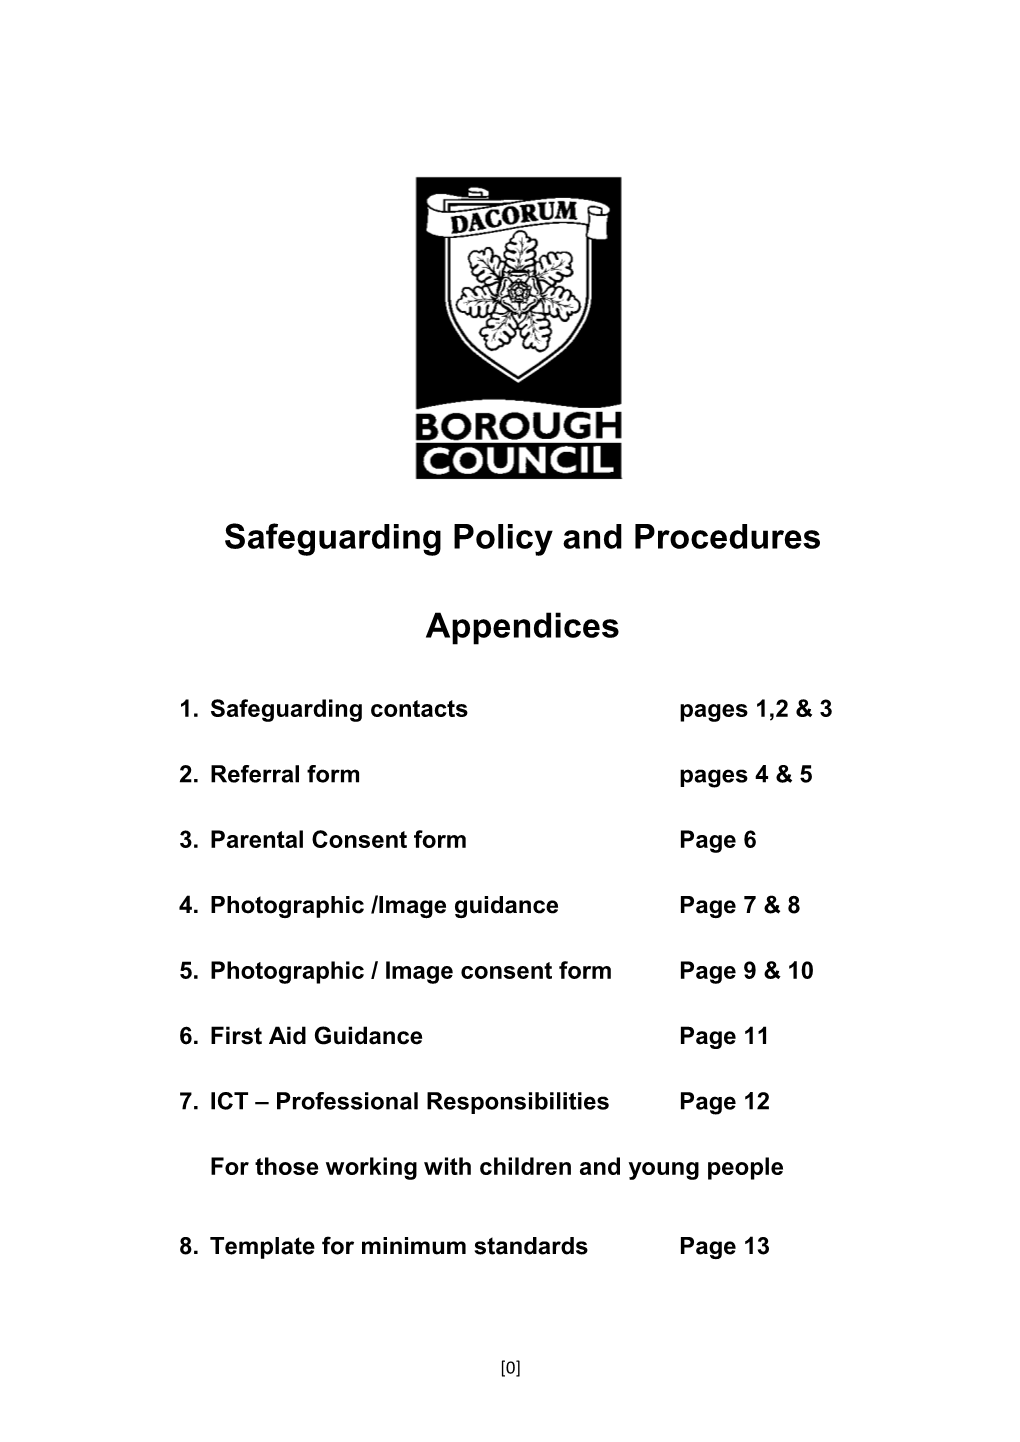 Safeguarding Policy and Procedures Appendices